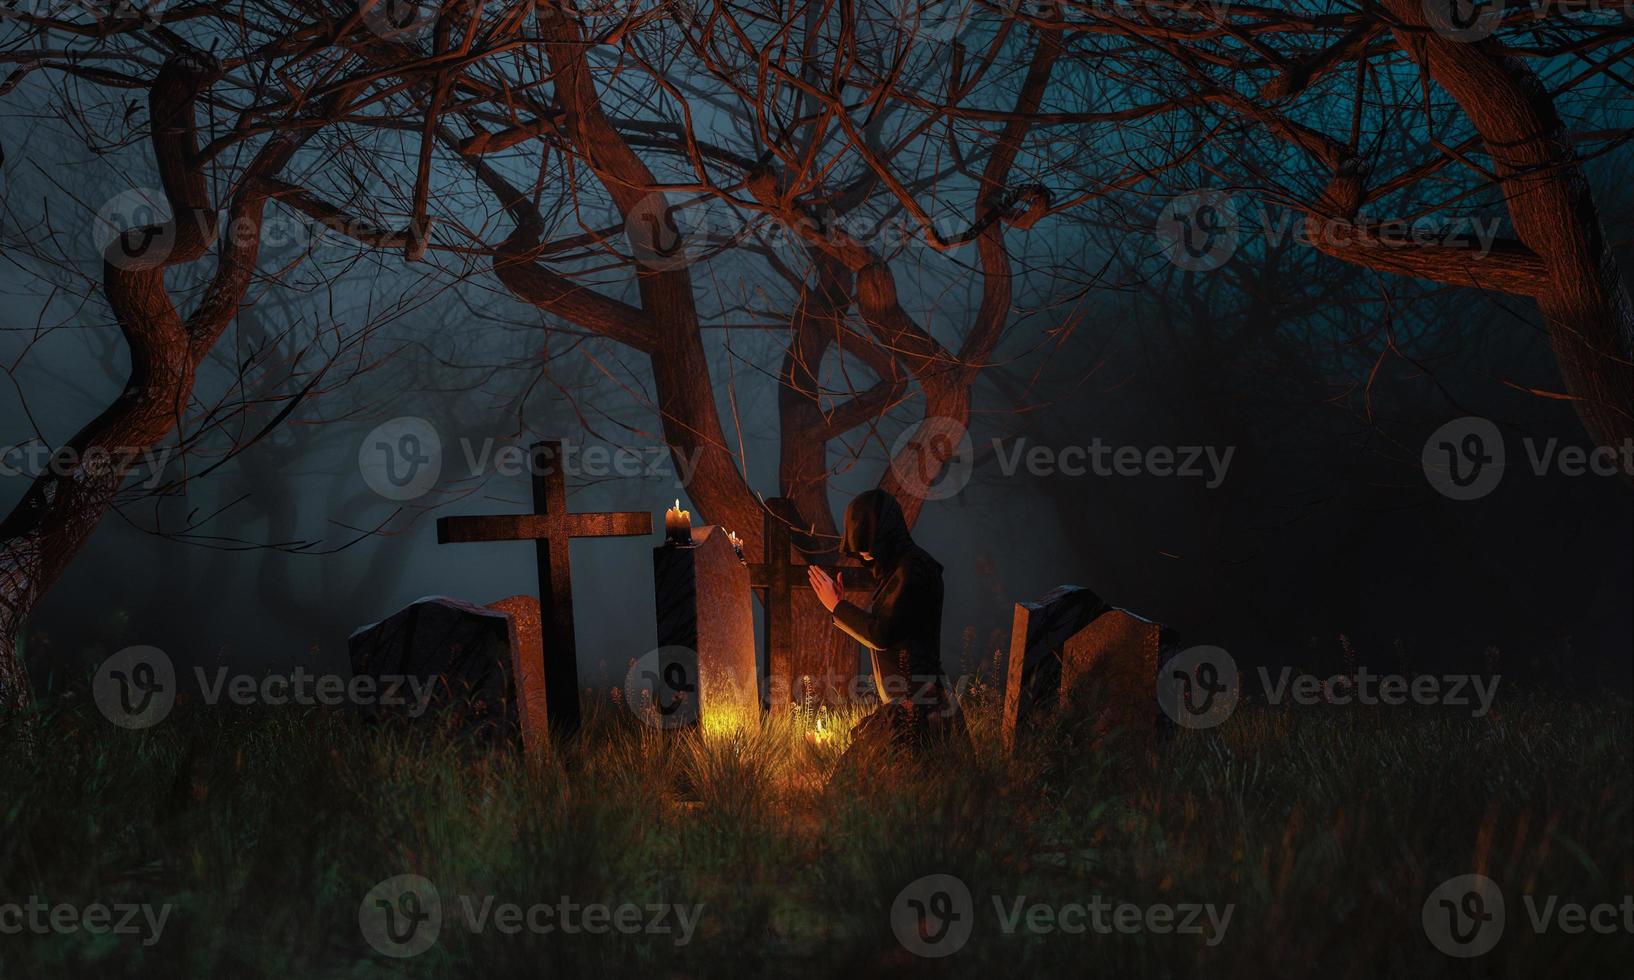 Praying in a graveyard in a spooky forest photo